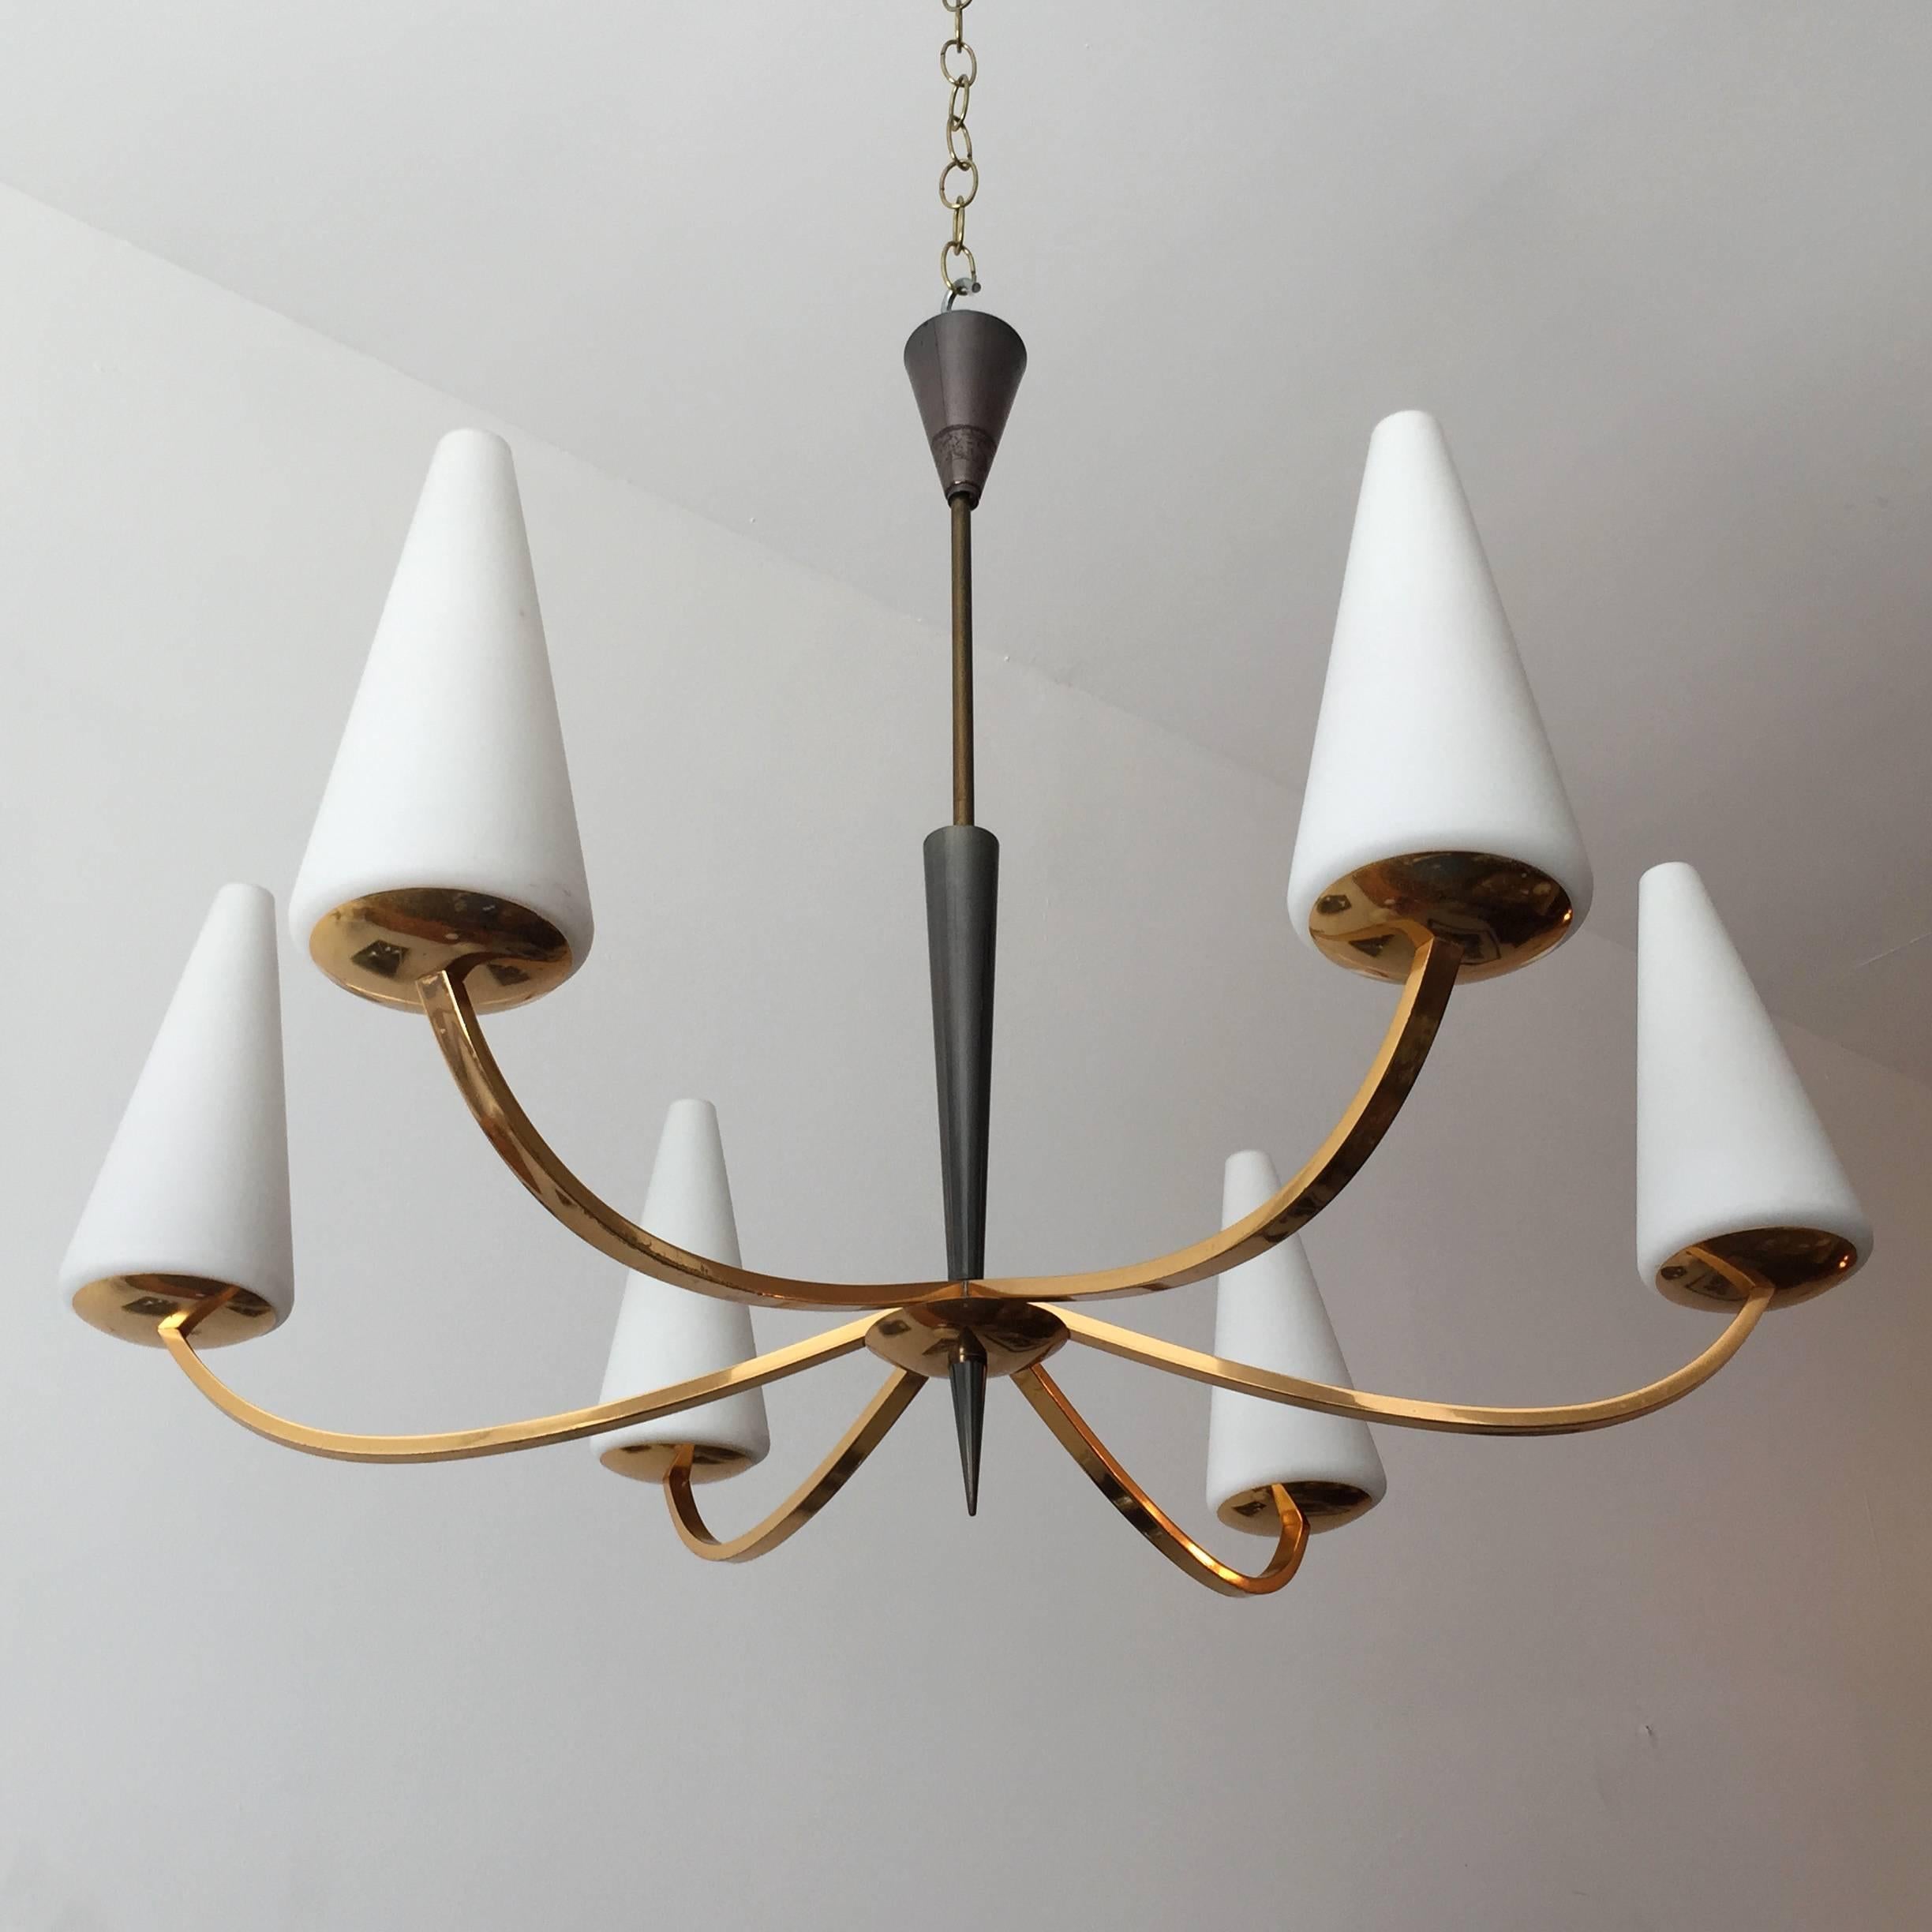 An original 1960s French modern chandelier composed of a golden brass and gun metal enamel body with white matte glass cone shades. Newly rewired.